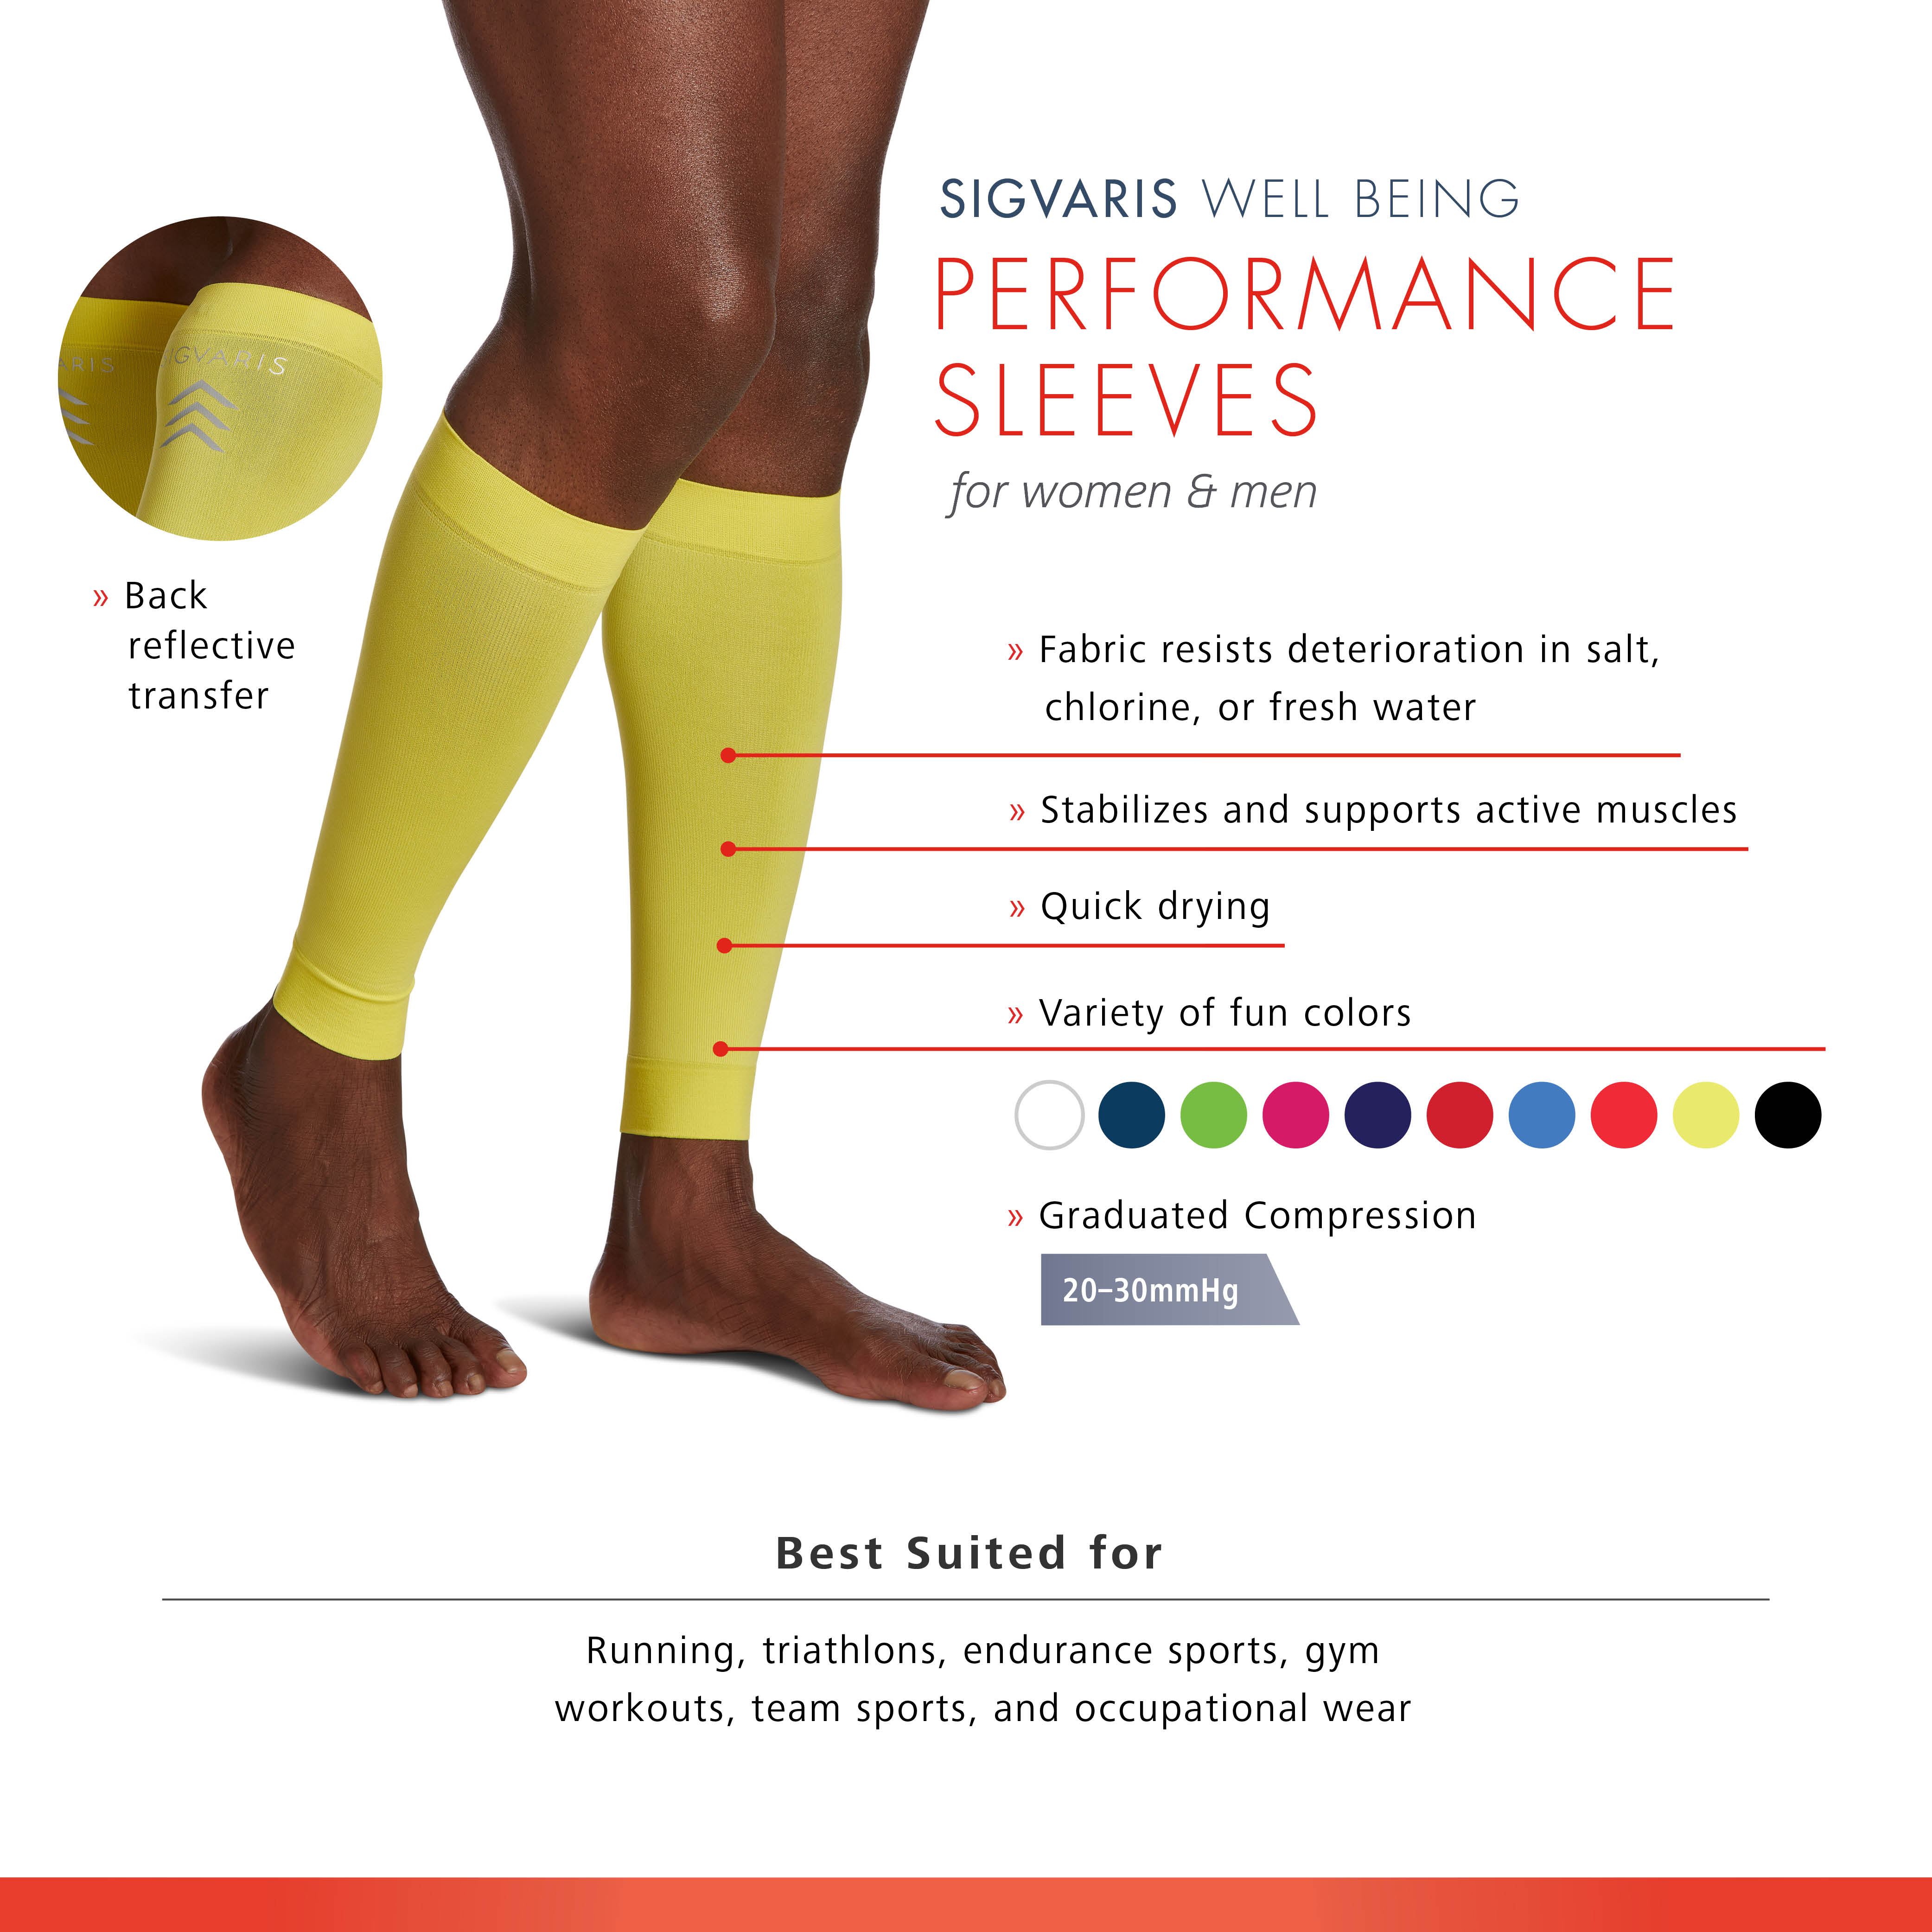 Sigvaris Athletic Performance Sleeves 20-30 mmHg Compression Features